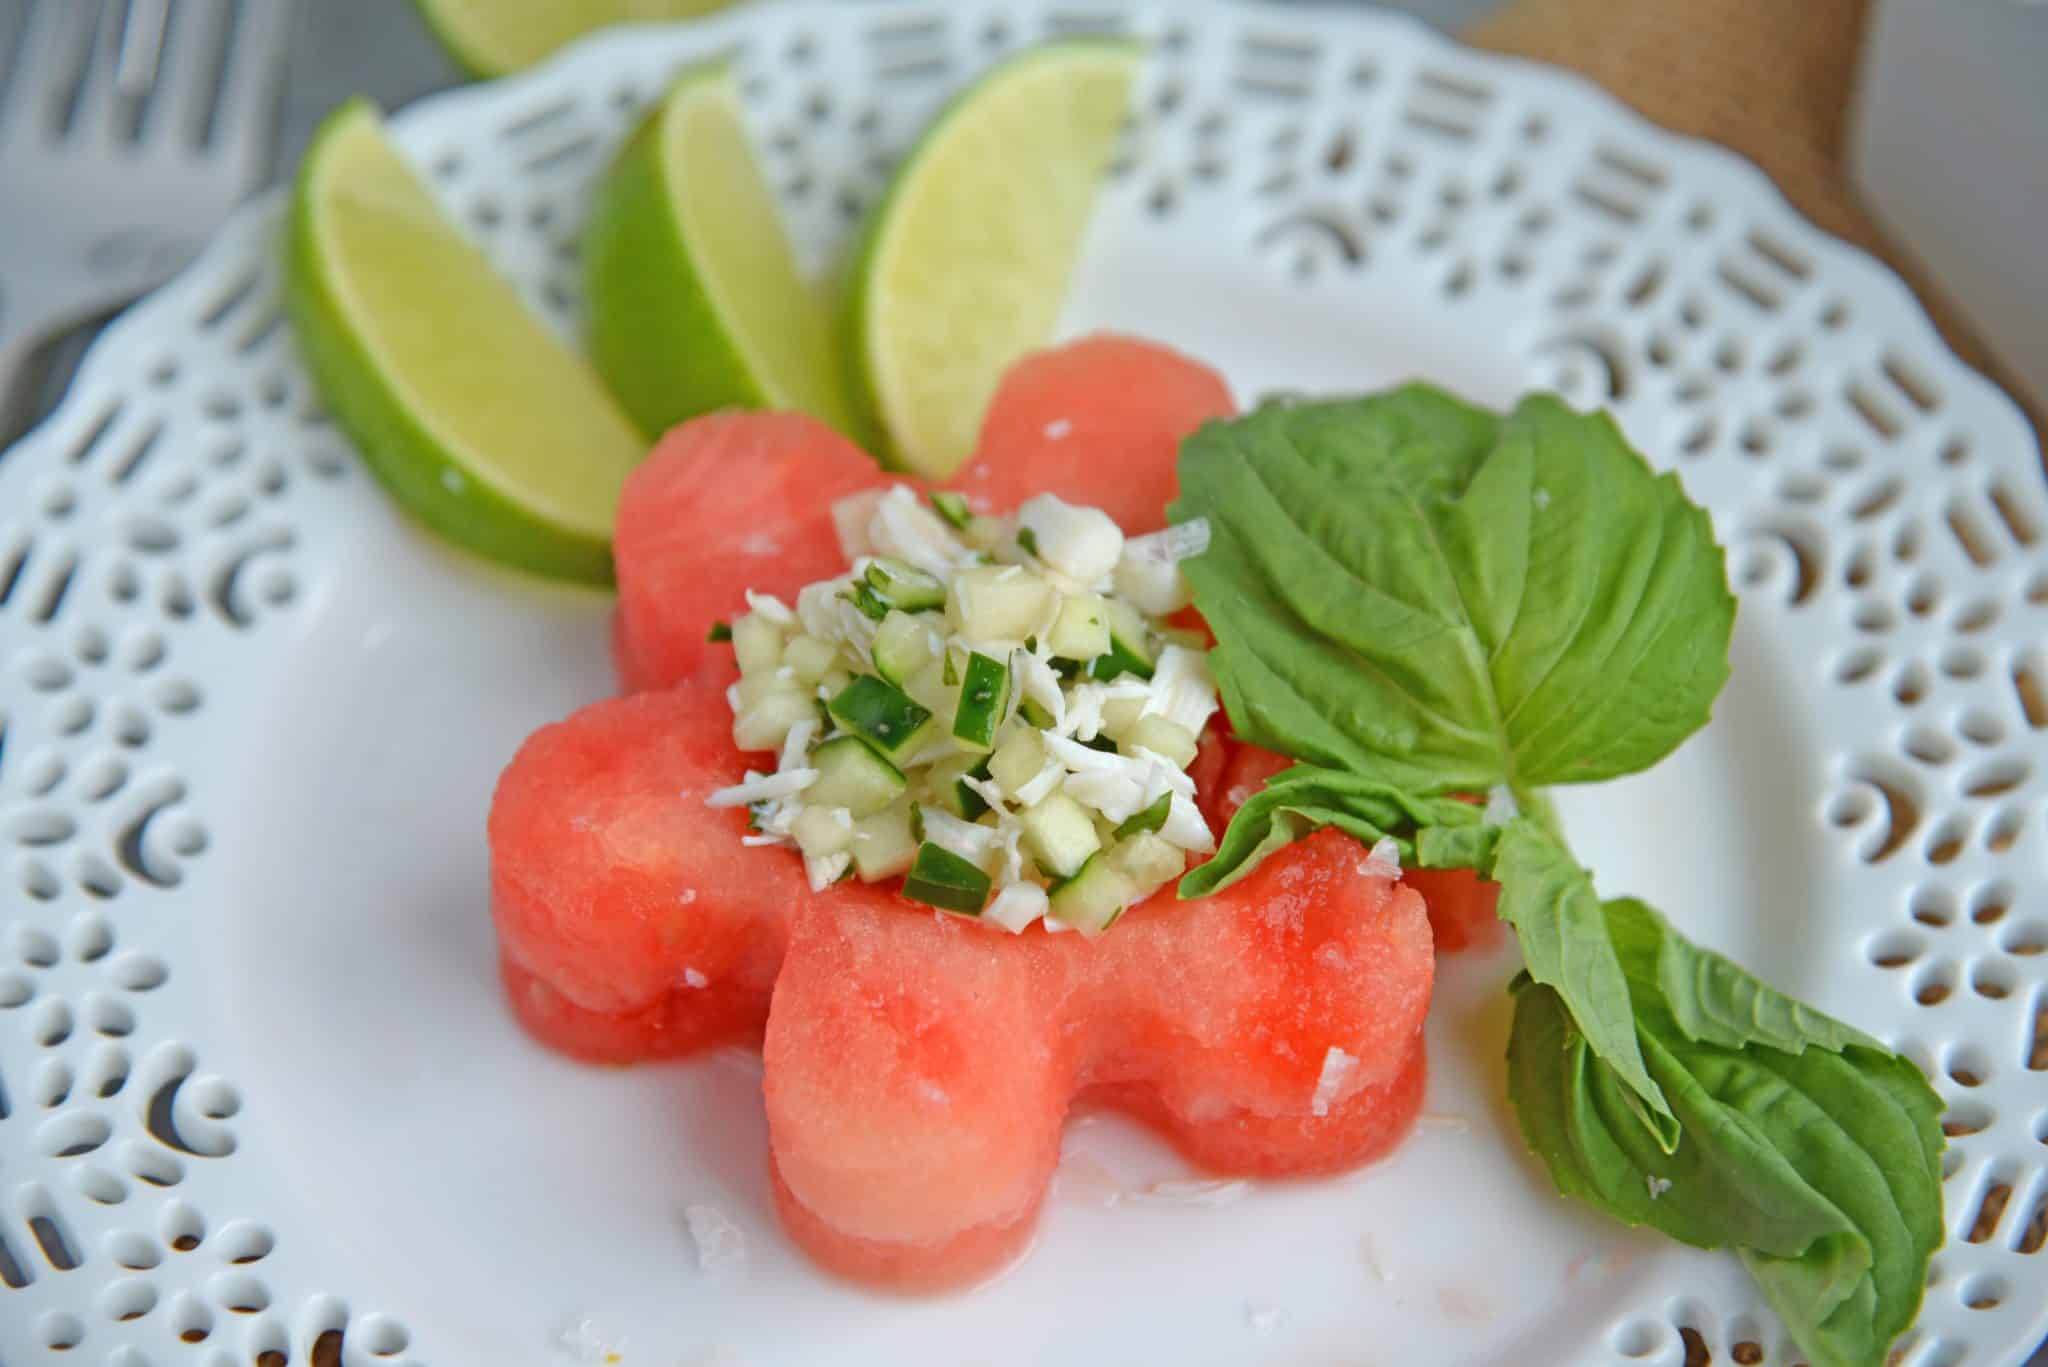 Watermelon Crab Salad is a refreshing, healthy salad complete with crab meat, a touch of heat, and a good dose of watermelon. Perfect for a light lunch! #watermelonsalad #crabmeat #watermelon www.savoryexperiments.com